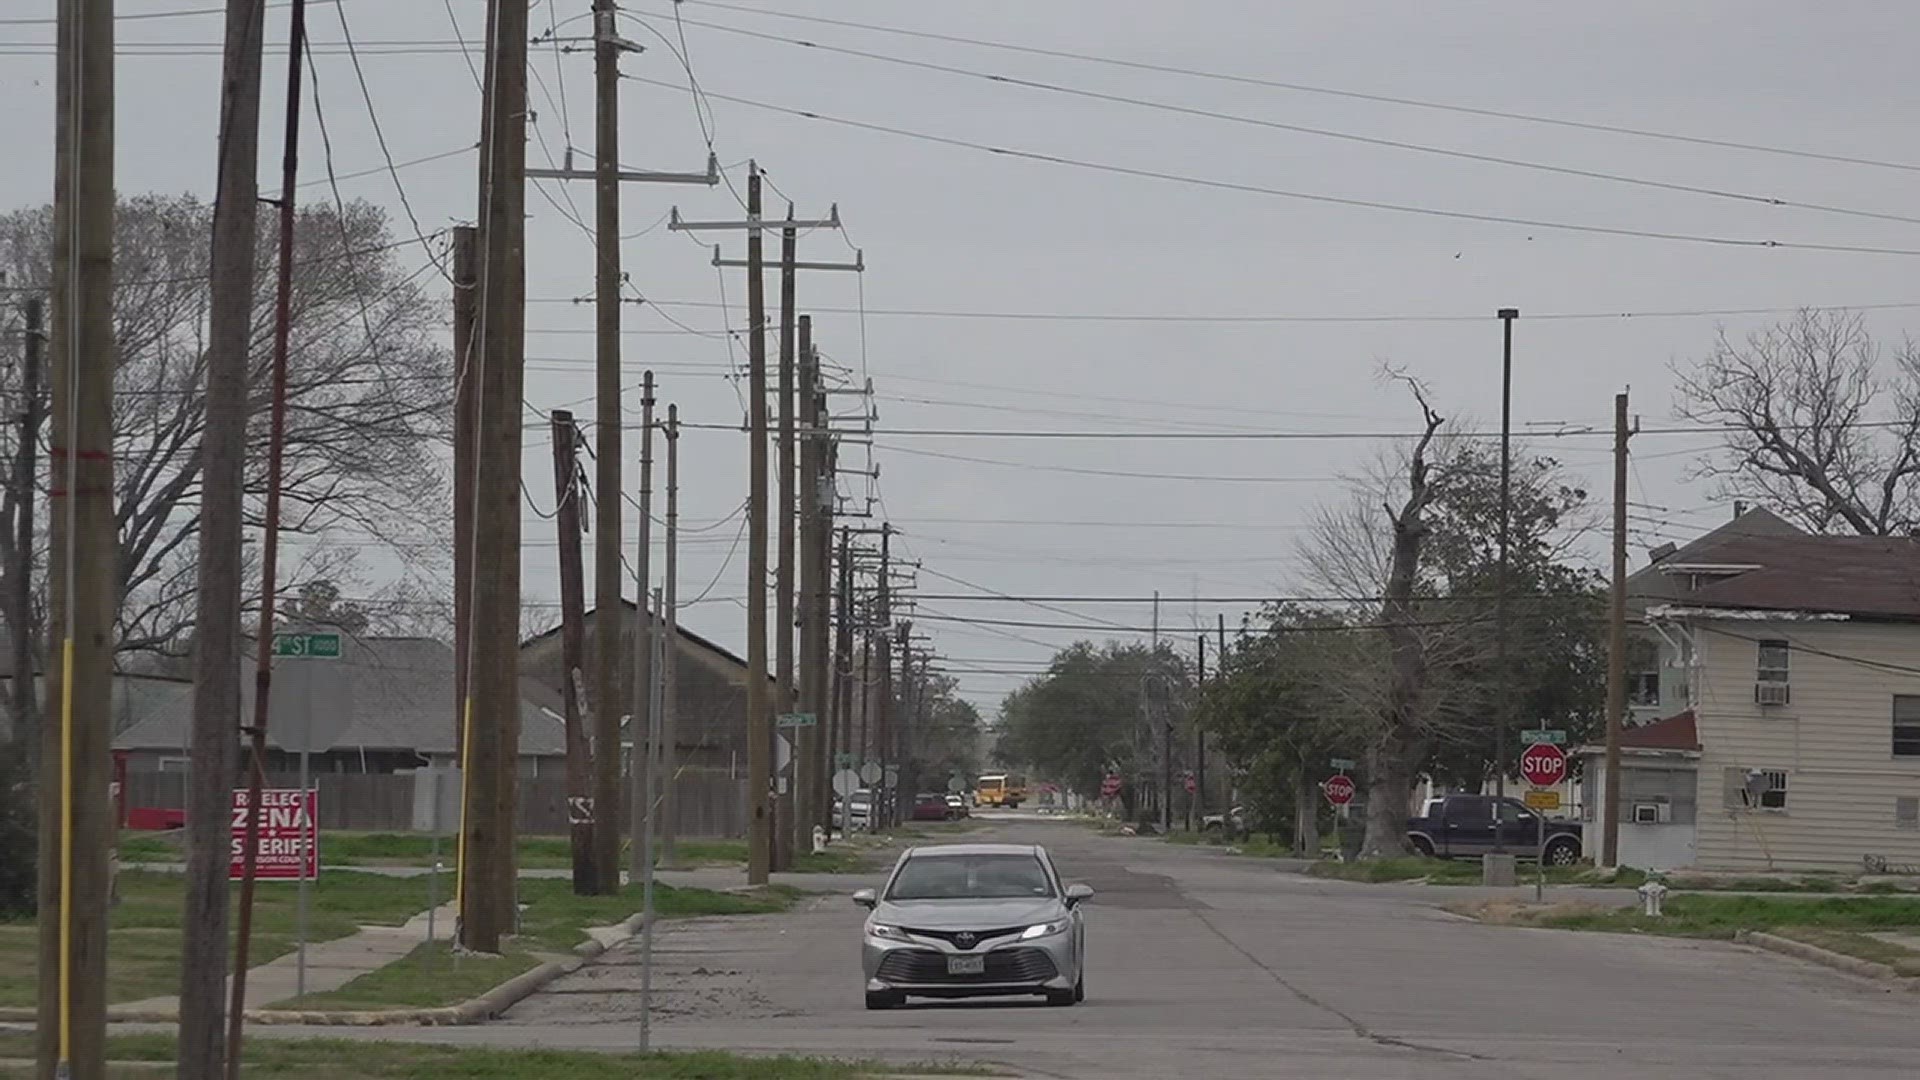 Southeast Texas citizens are no strangers to inclement weather and lengthy power outages in the aftermath. However, with these upgrades that may be changing soon.